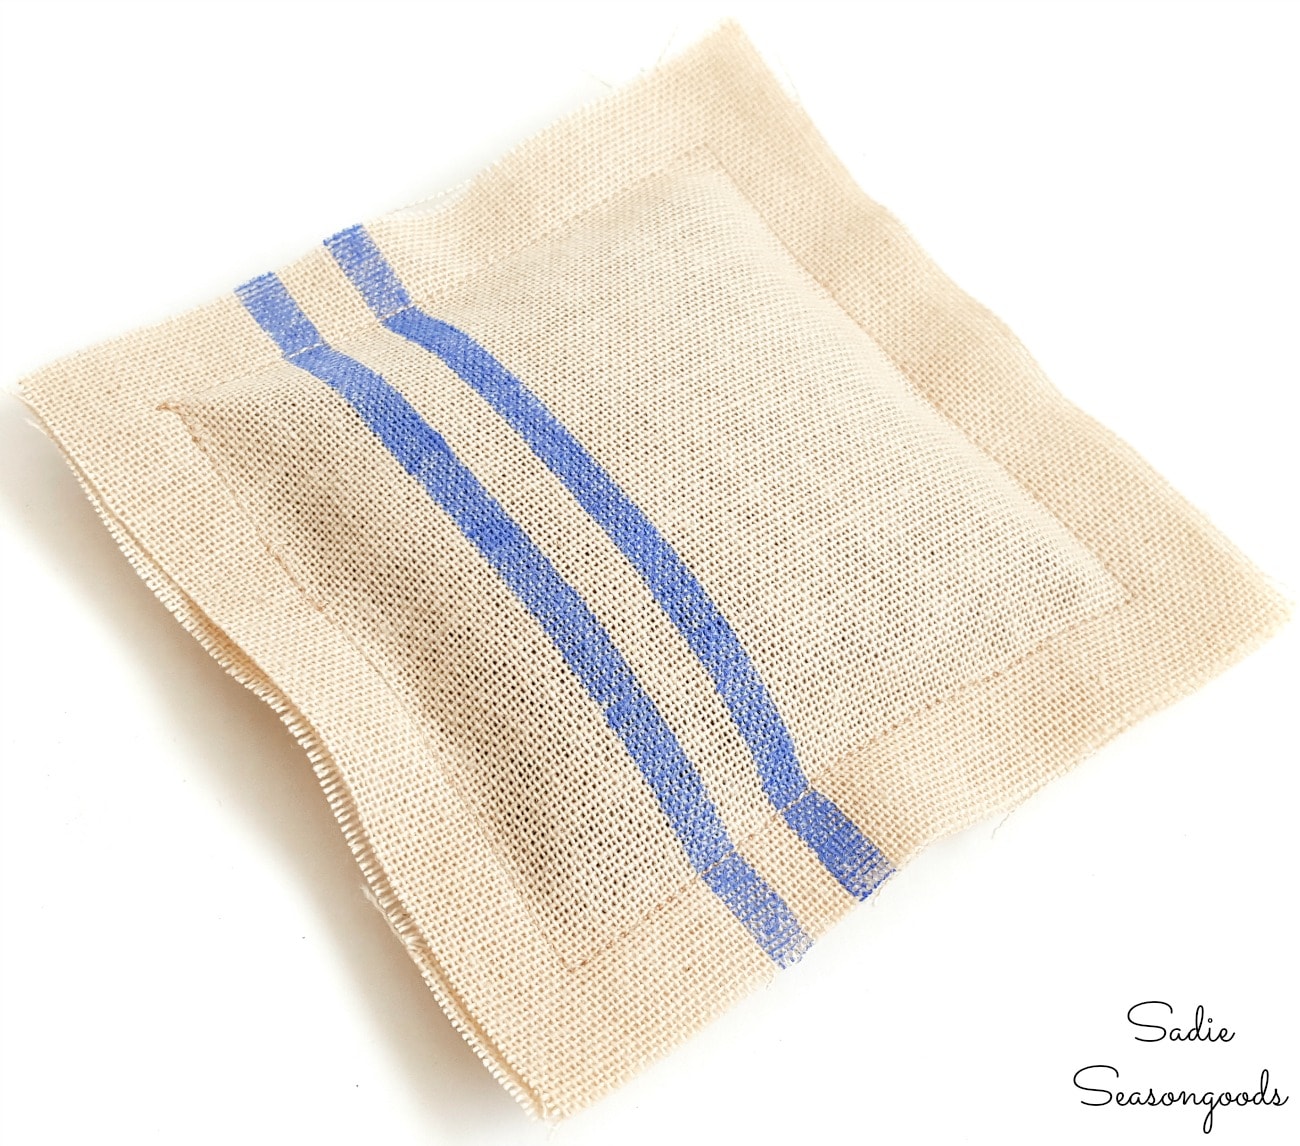 Scented sachet that looks like French grain sack fabric